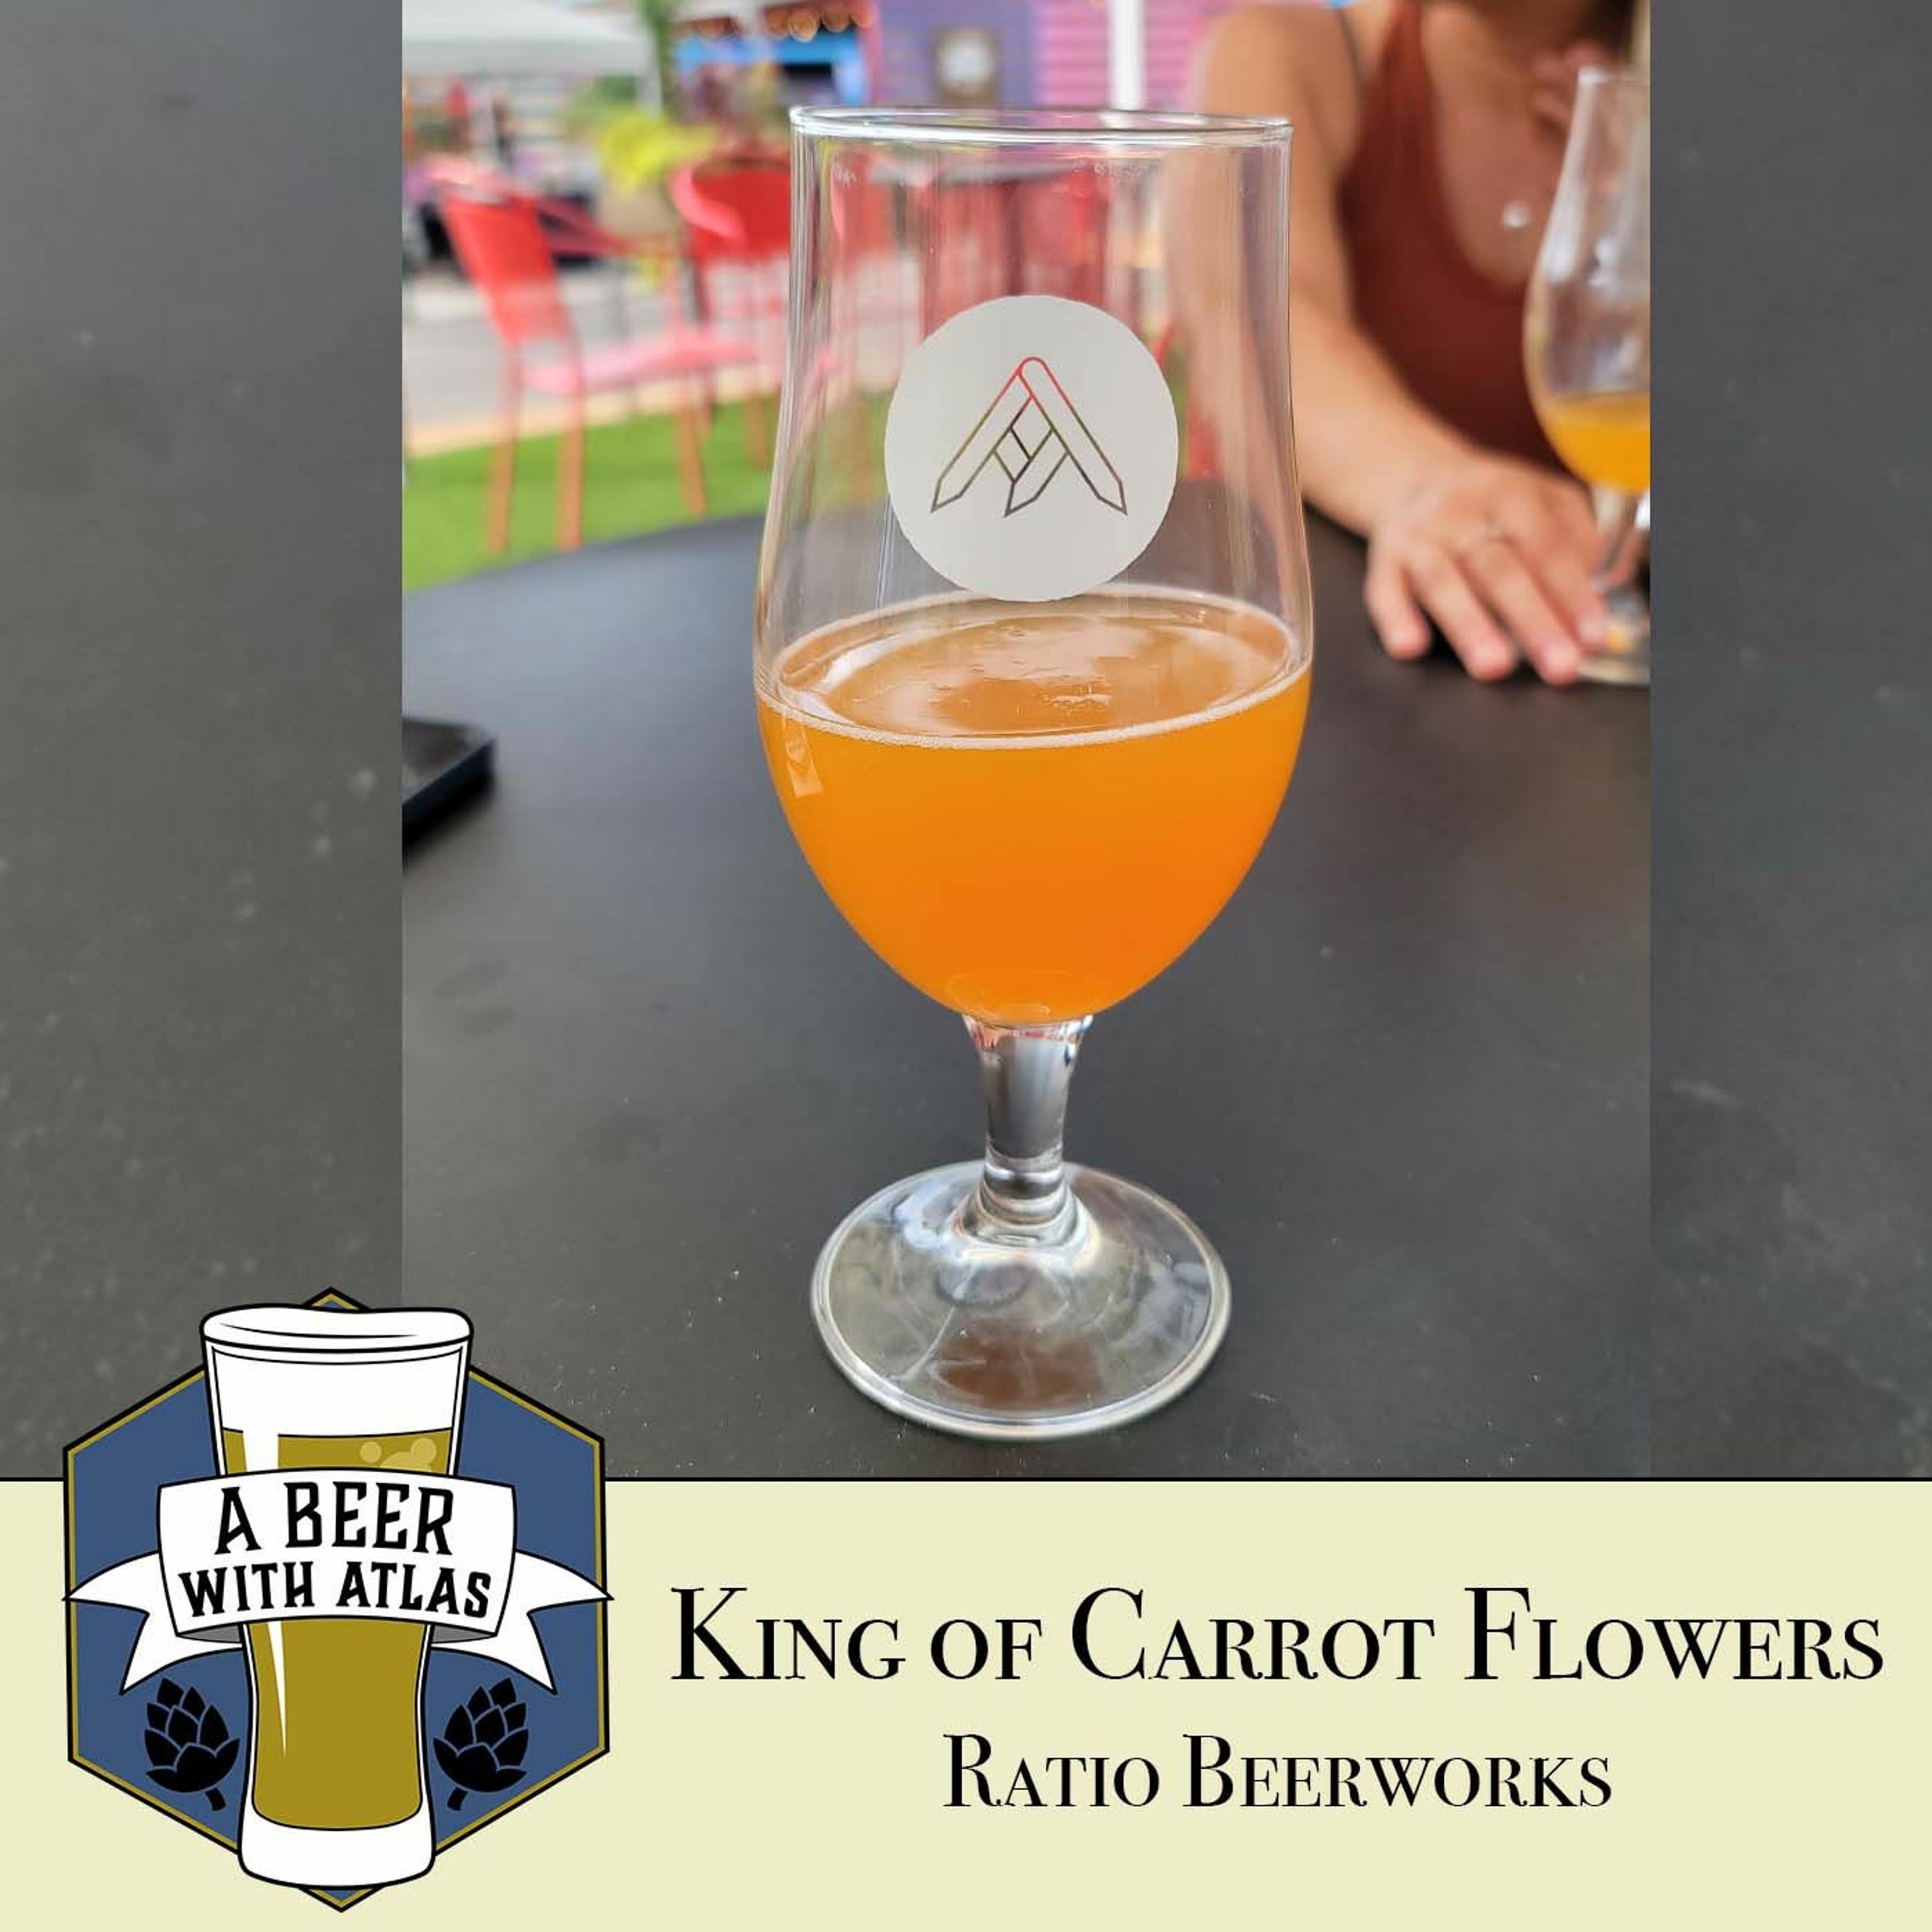 King of Carrot Flowers by Ratio Beerworks - A Beer with Atlas 161